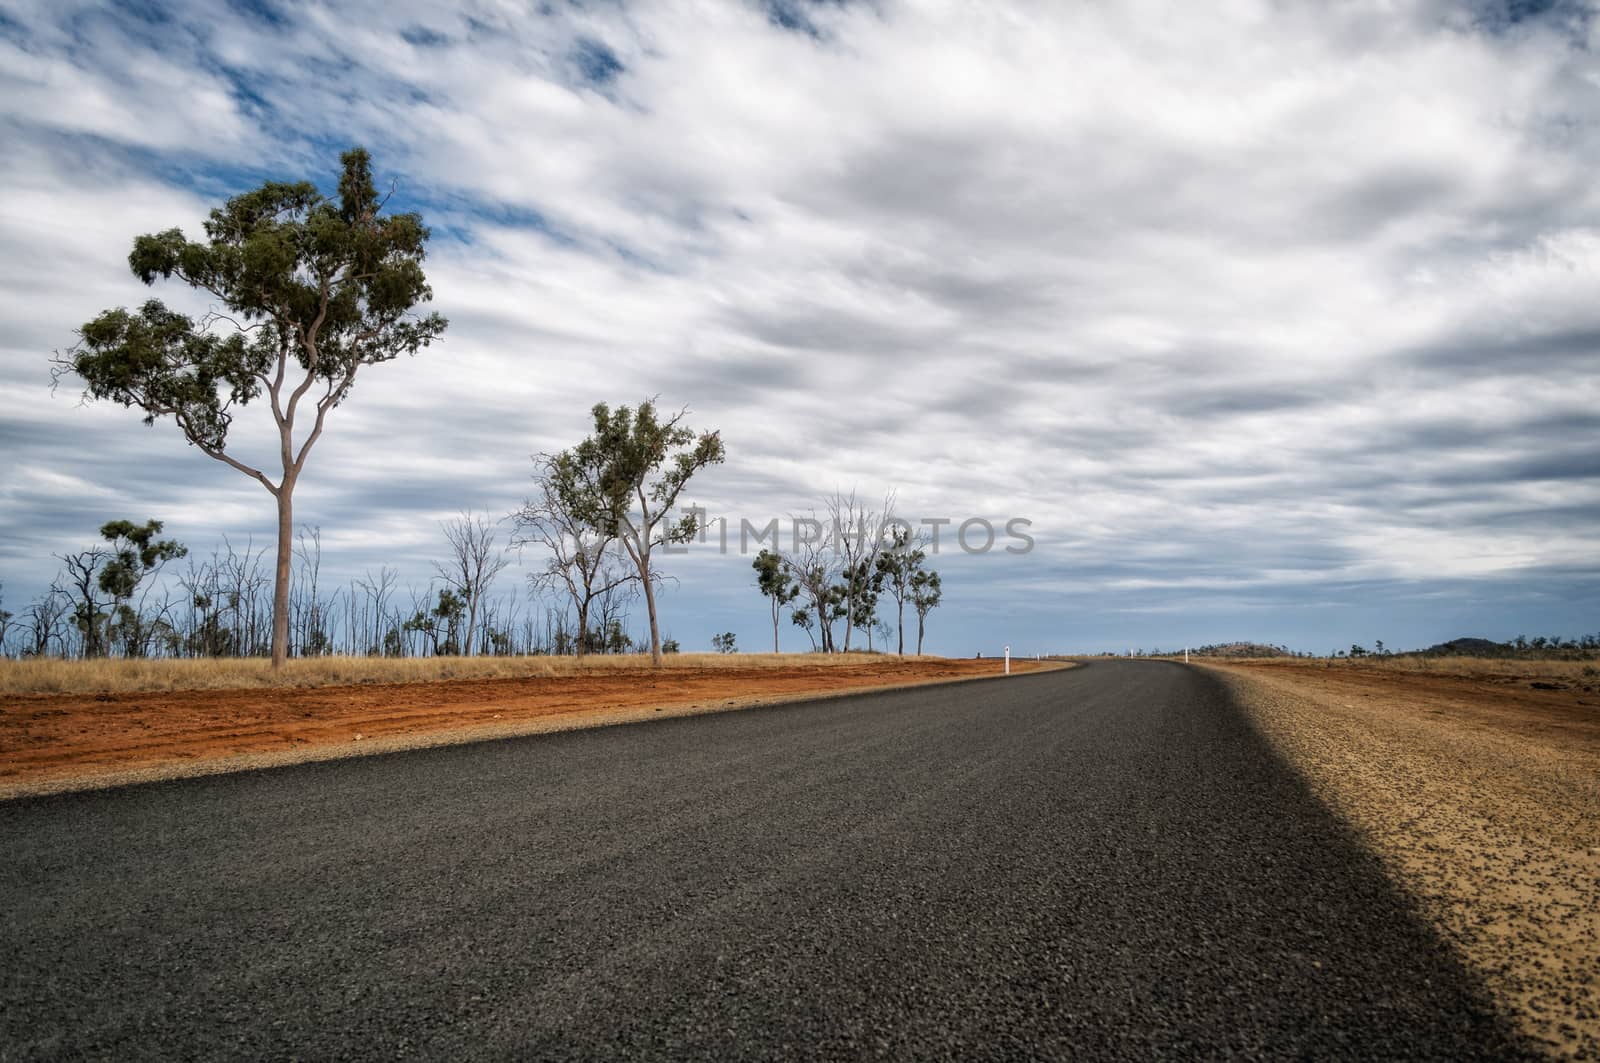 Landscape of a lonely road in New Wales, Australia